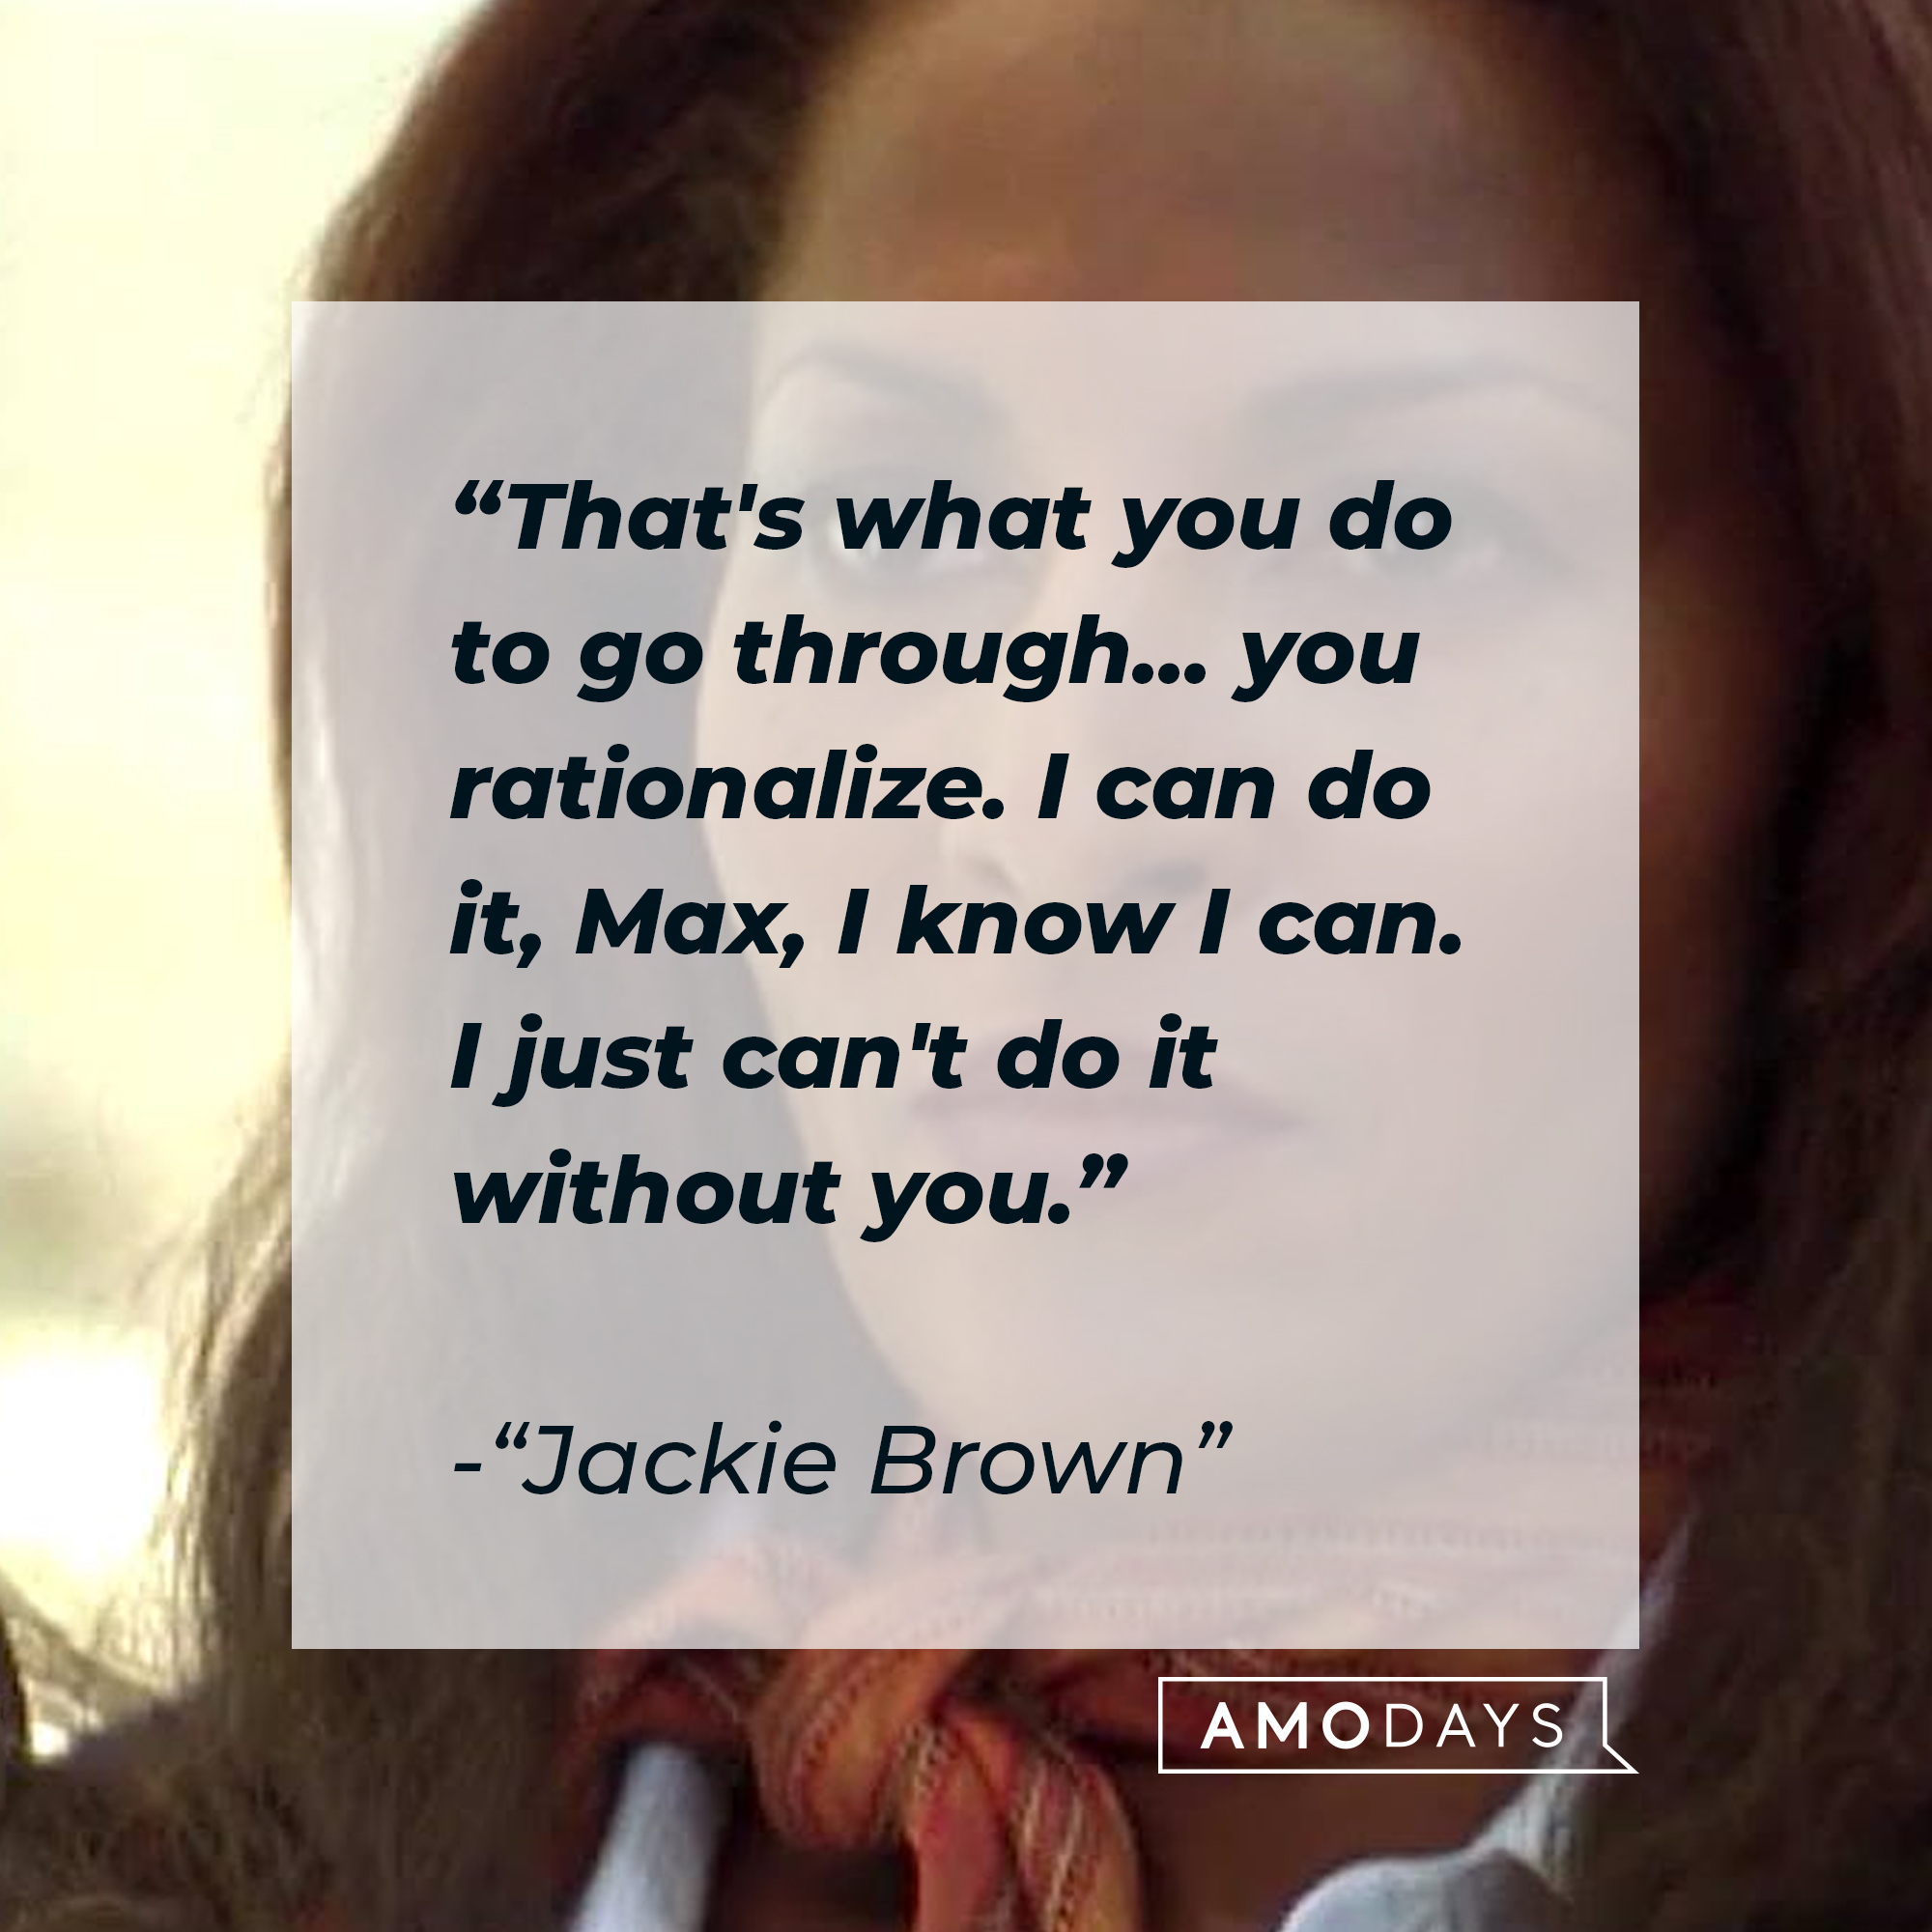 Jackie Brown's quote: "That's what you do to go through... you rationalize. I can do it, Max, I know I can. I just can't do it without you." | Source: Facebook/JackieBrownMovie